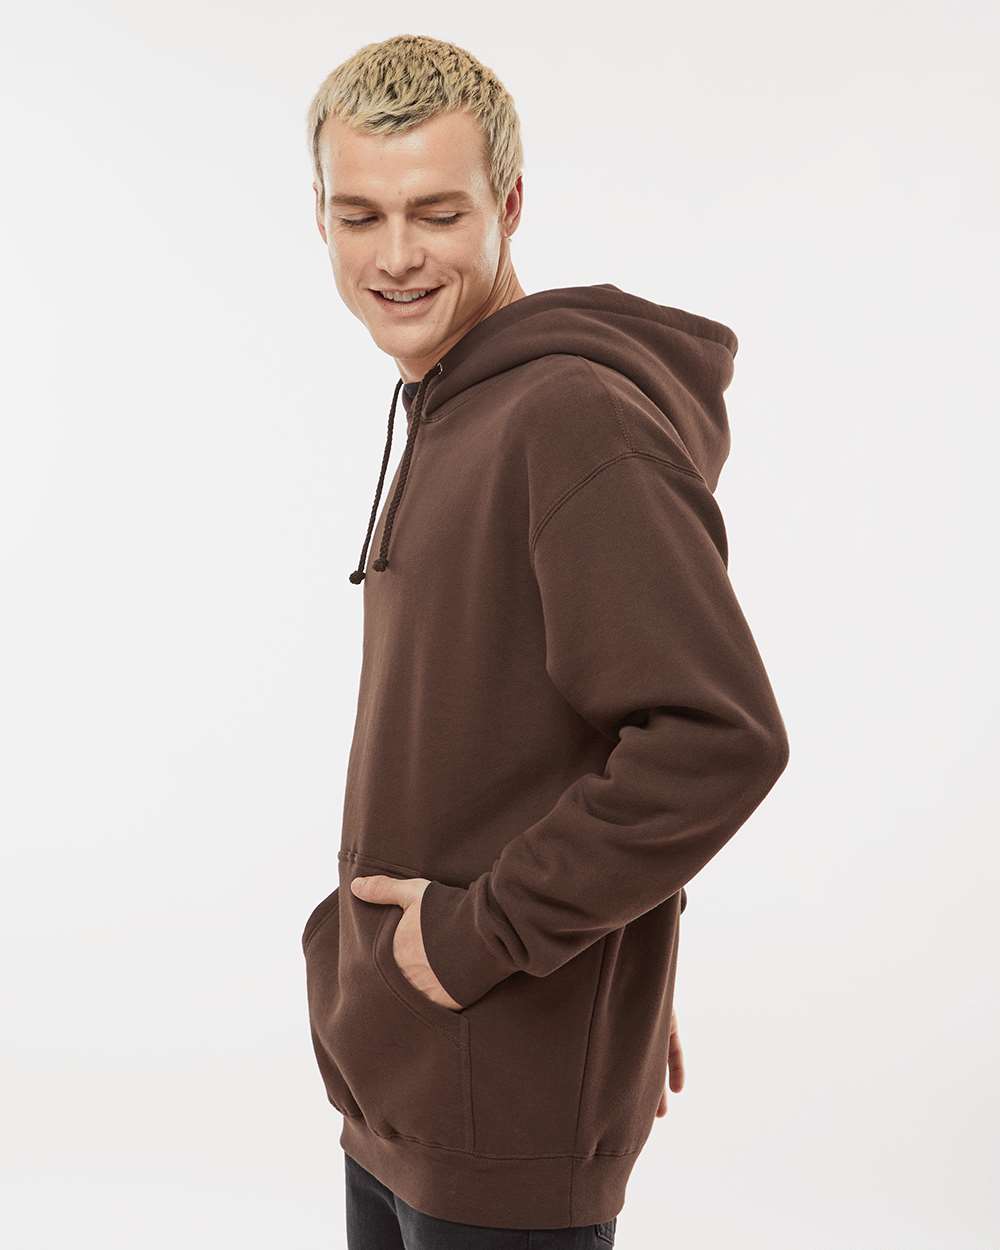 Premium Embroidered / Heavyweight Hooded Pullover Sweatshirt / Brown / Salt and Sand